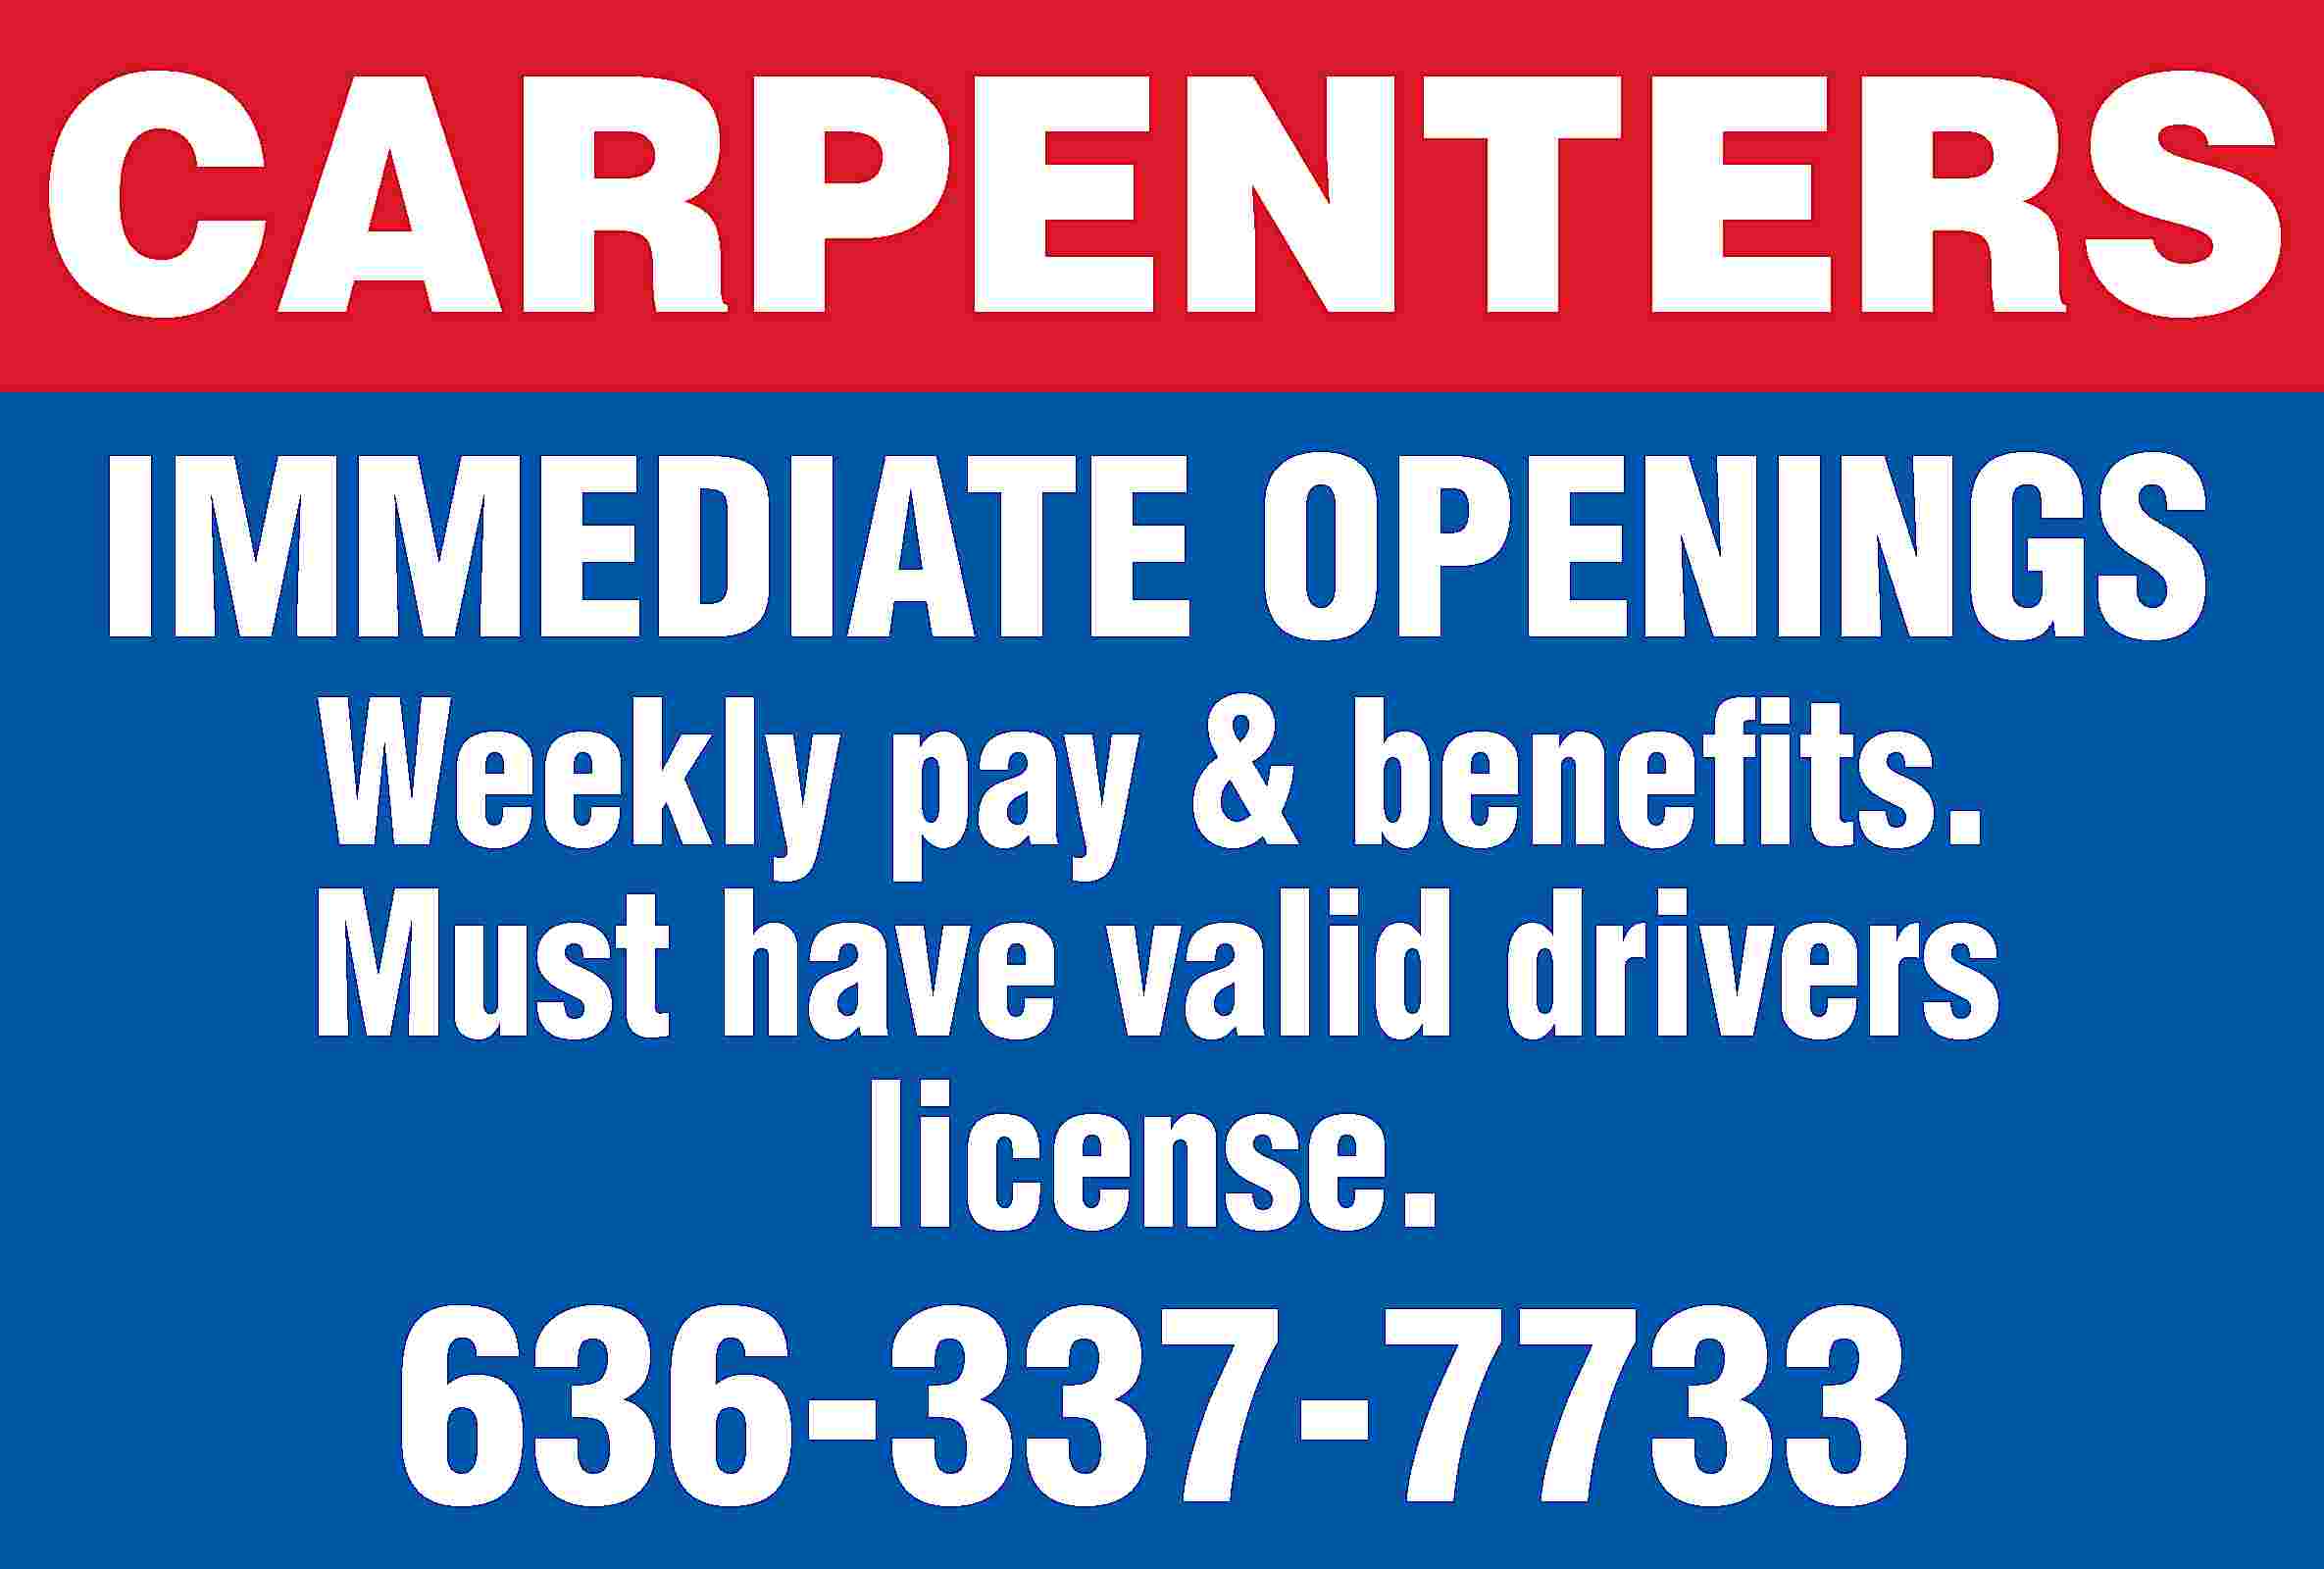 CARPENTERS IMMEDIATE OPENINGS Weekly pay  CARPENTERS IMMEDIATE OPENINGS Weekly pay & benefits. Must have valid drivers license. 636-337-7733